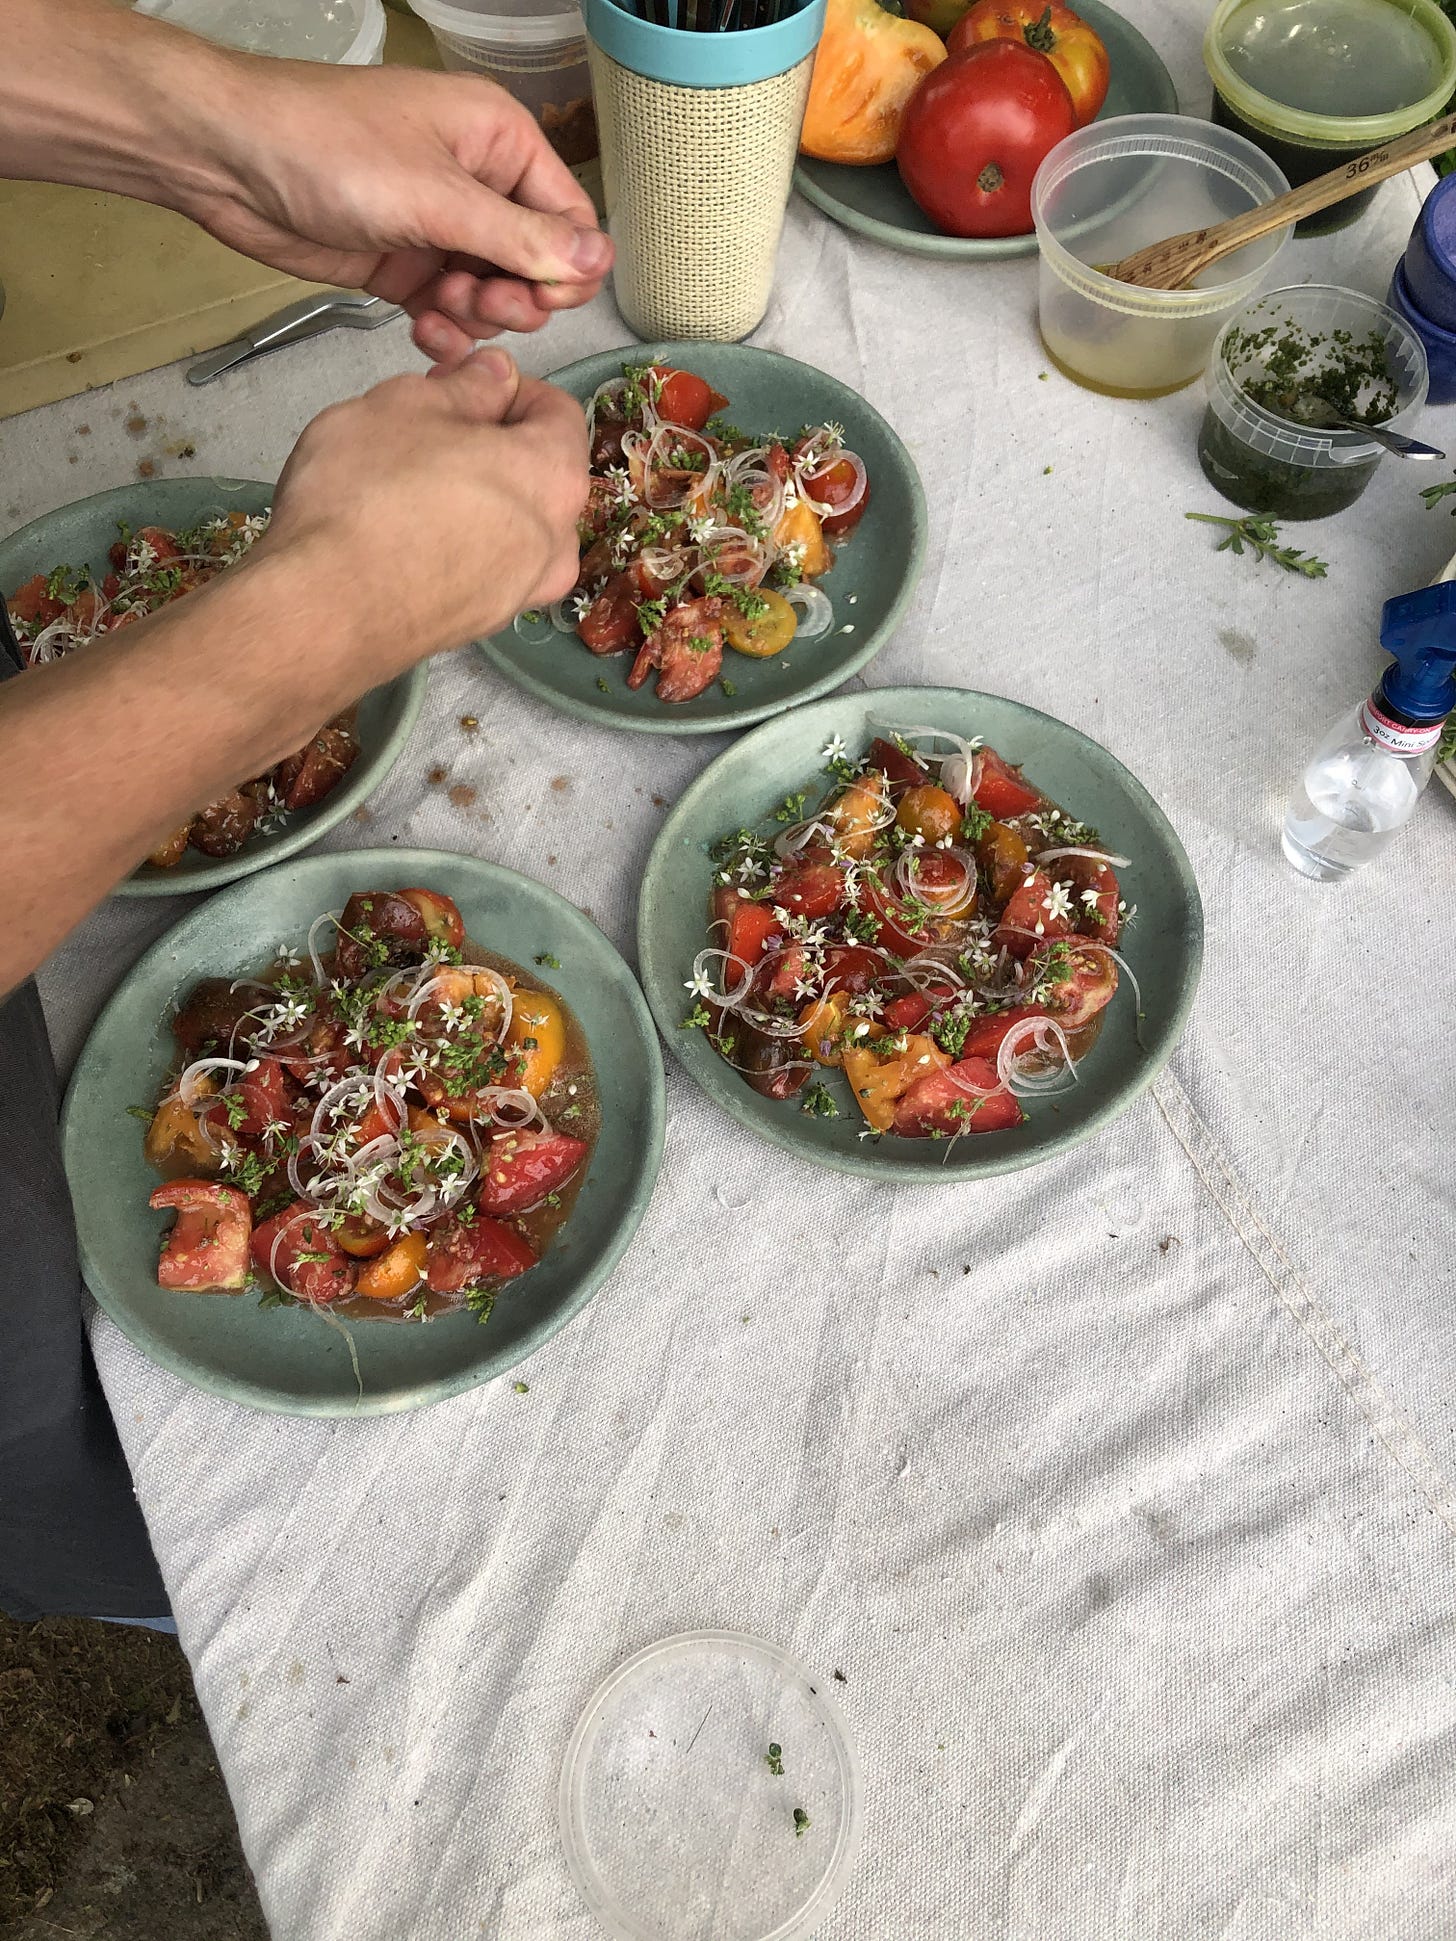 Tomato salad with flowering herbs